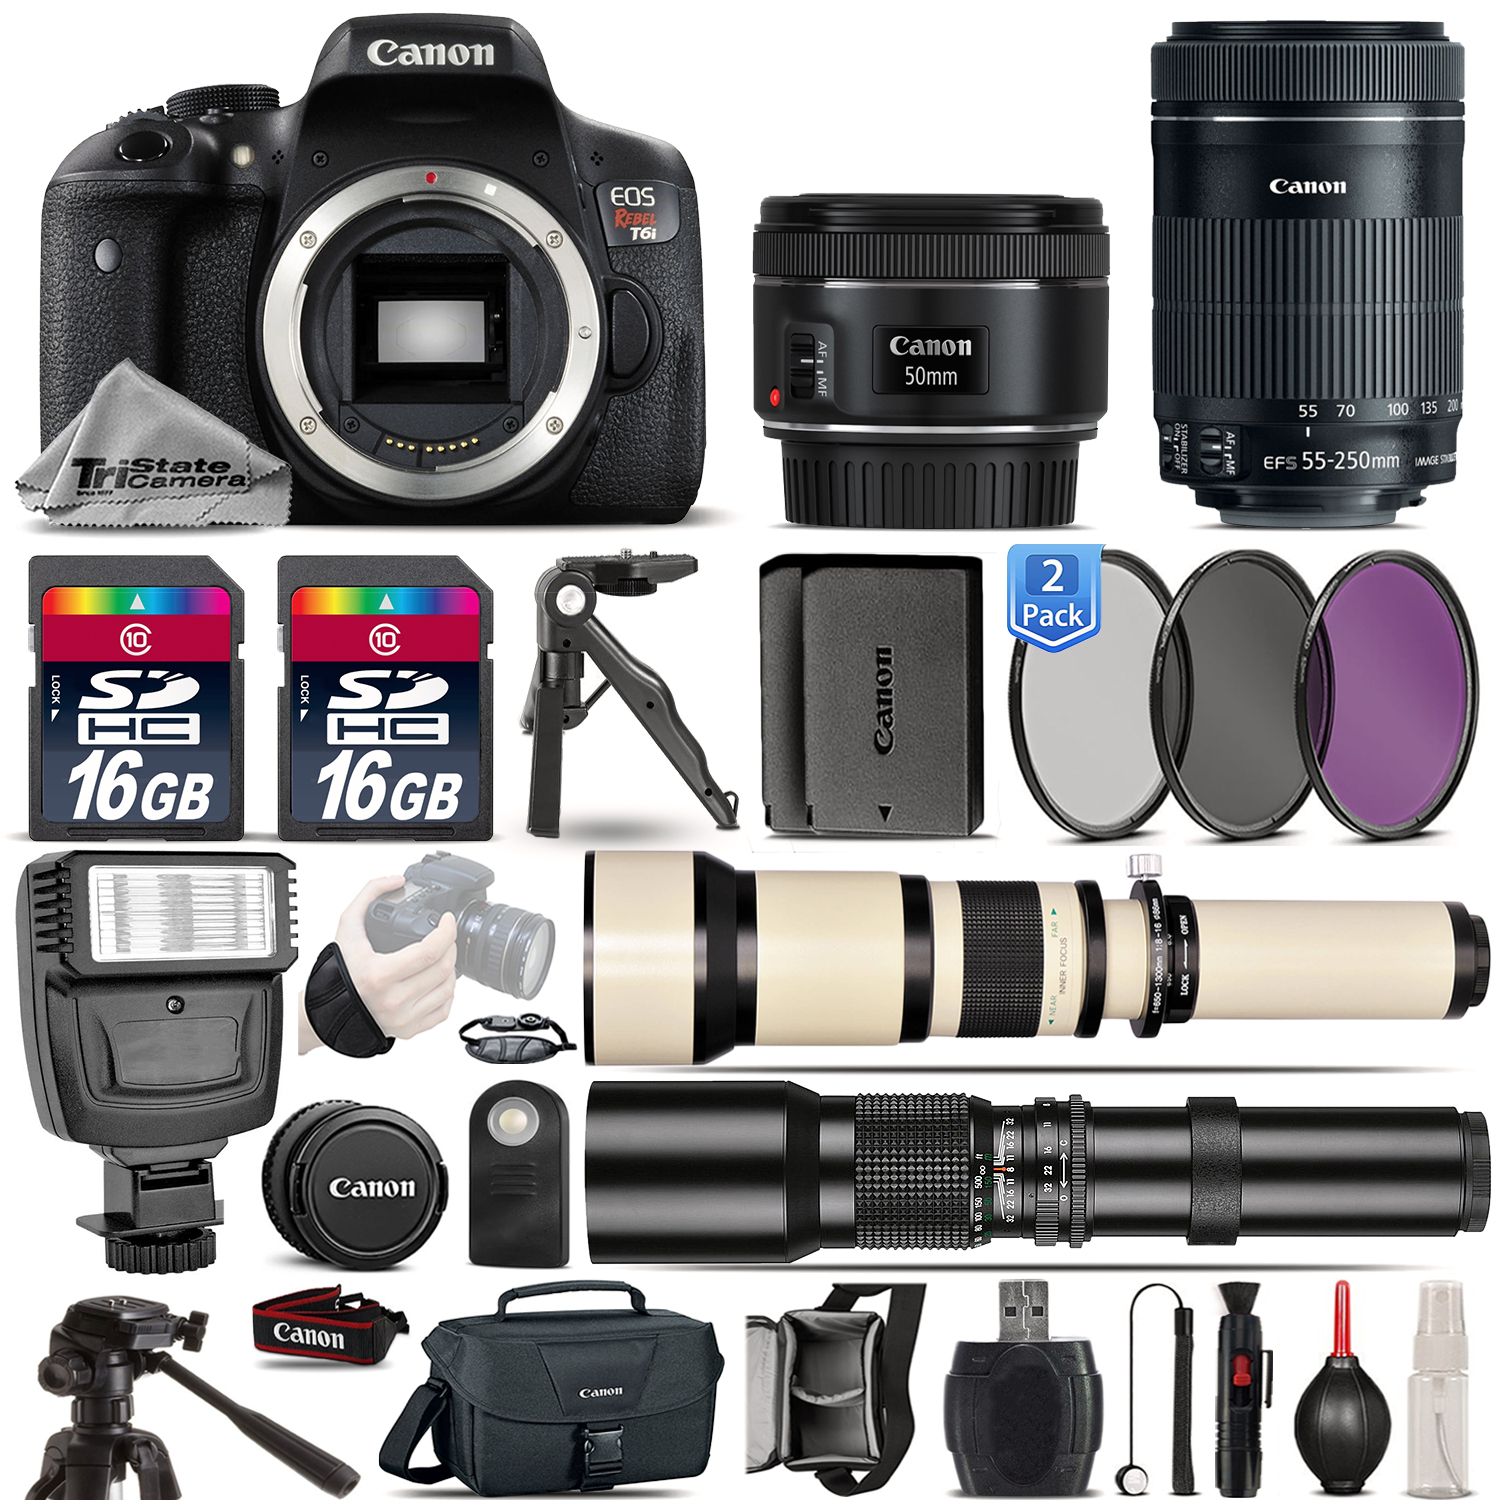 EOS Rebel T6i Camera + 50mm 1.8 + 55-250mm STM + Extra Battery - 32GB Kit *FREE SHIPPING*